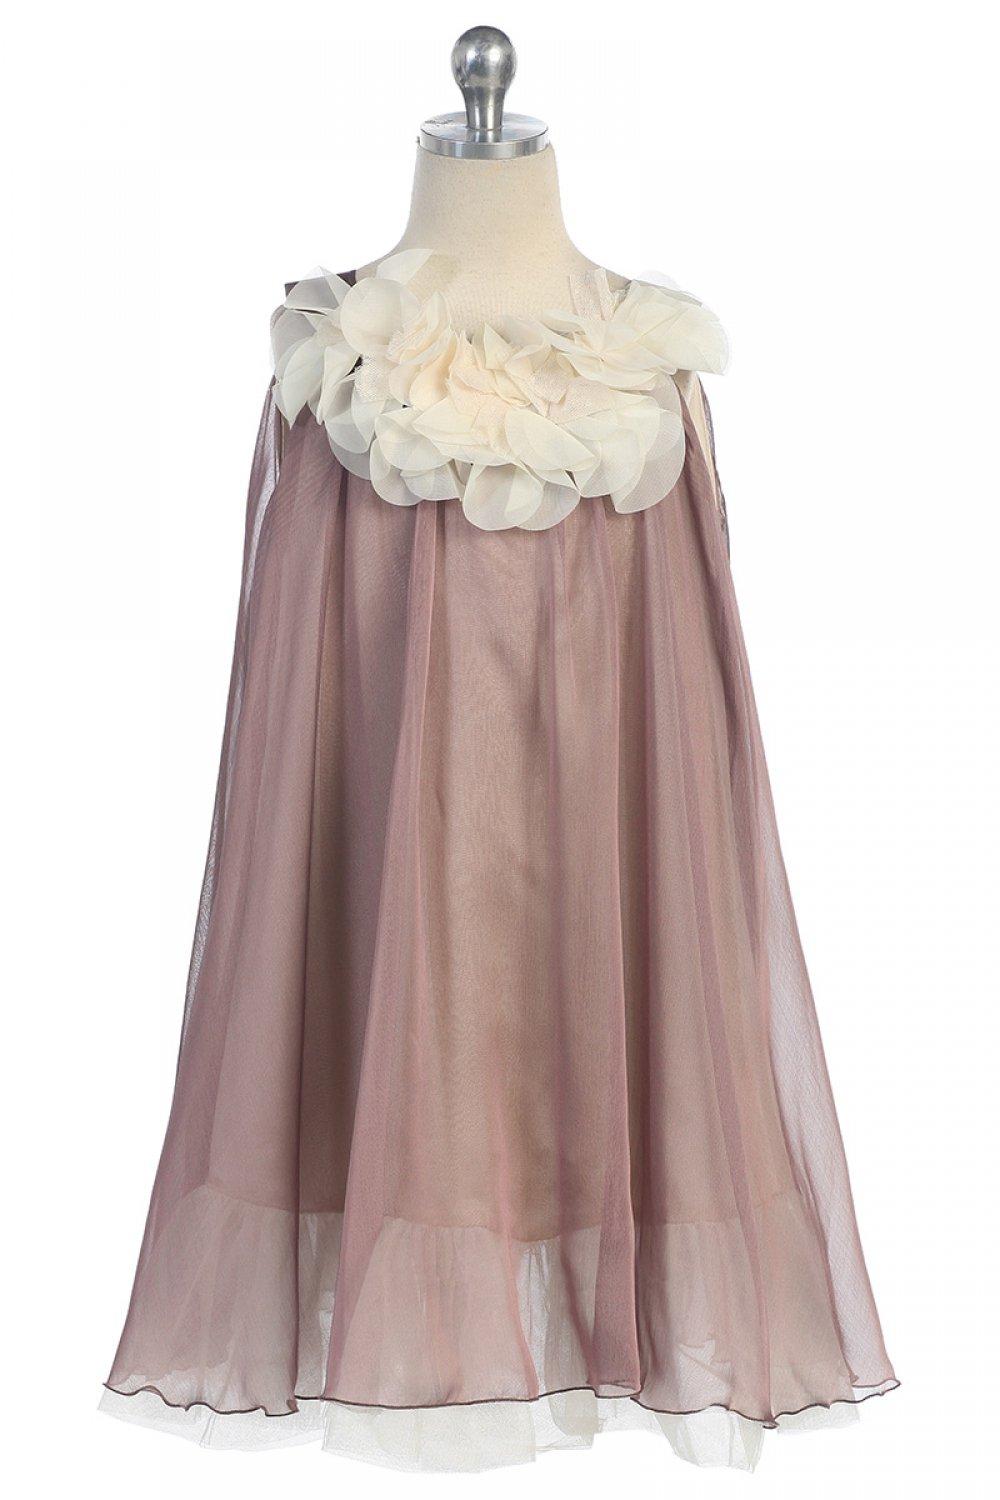 special occasion dresses for tweens